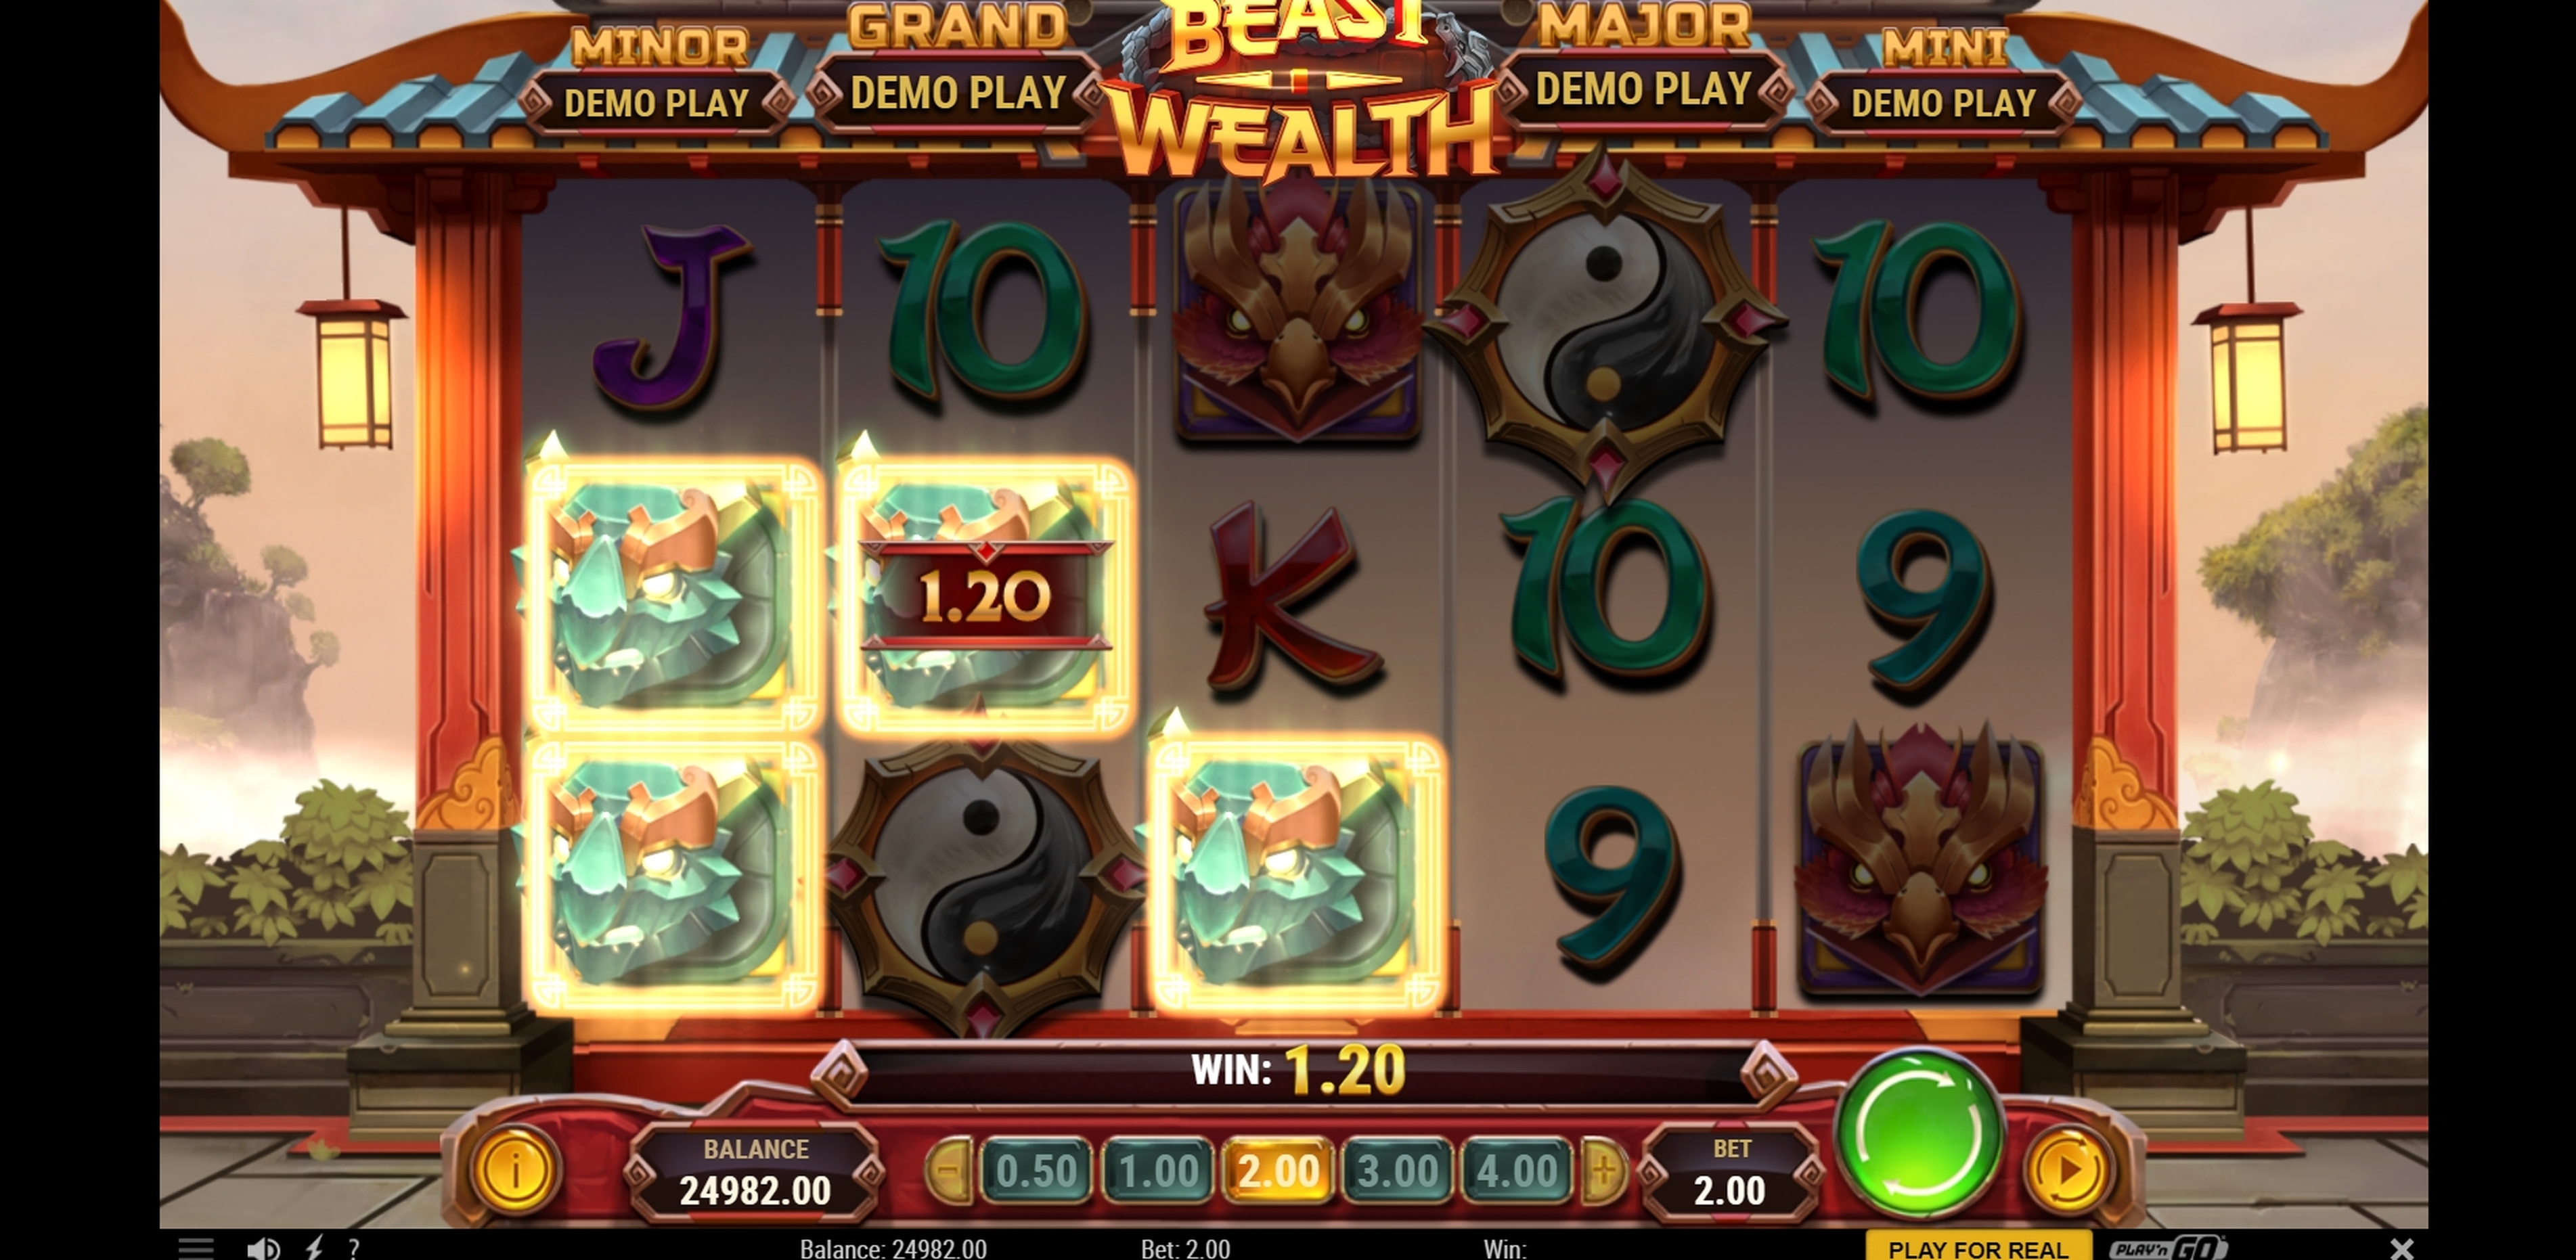 Win Money in Beast of Wealth Free Slot Game by Playn GO